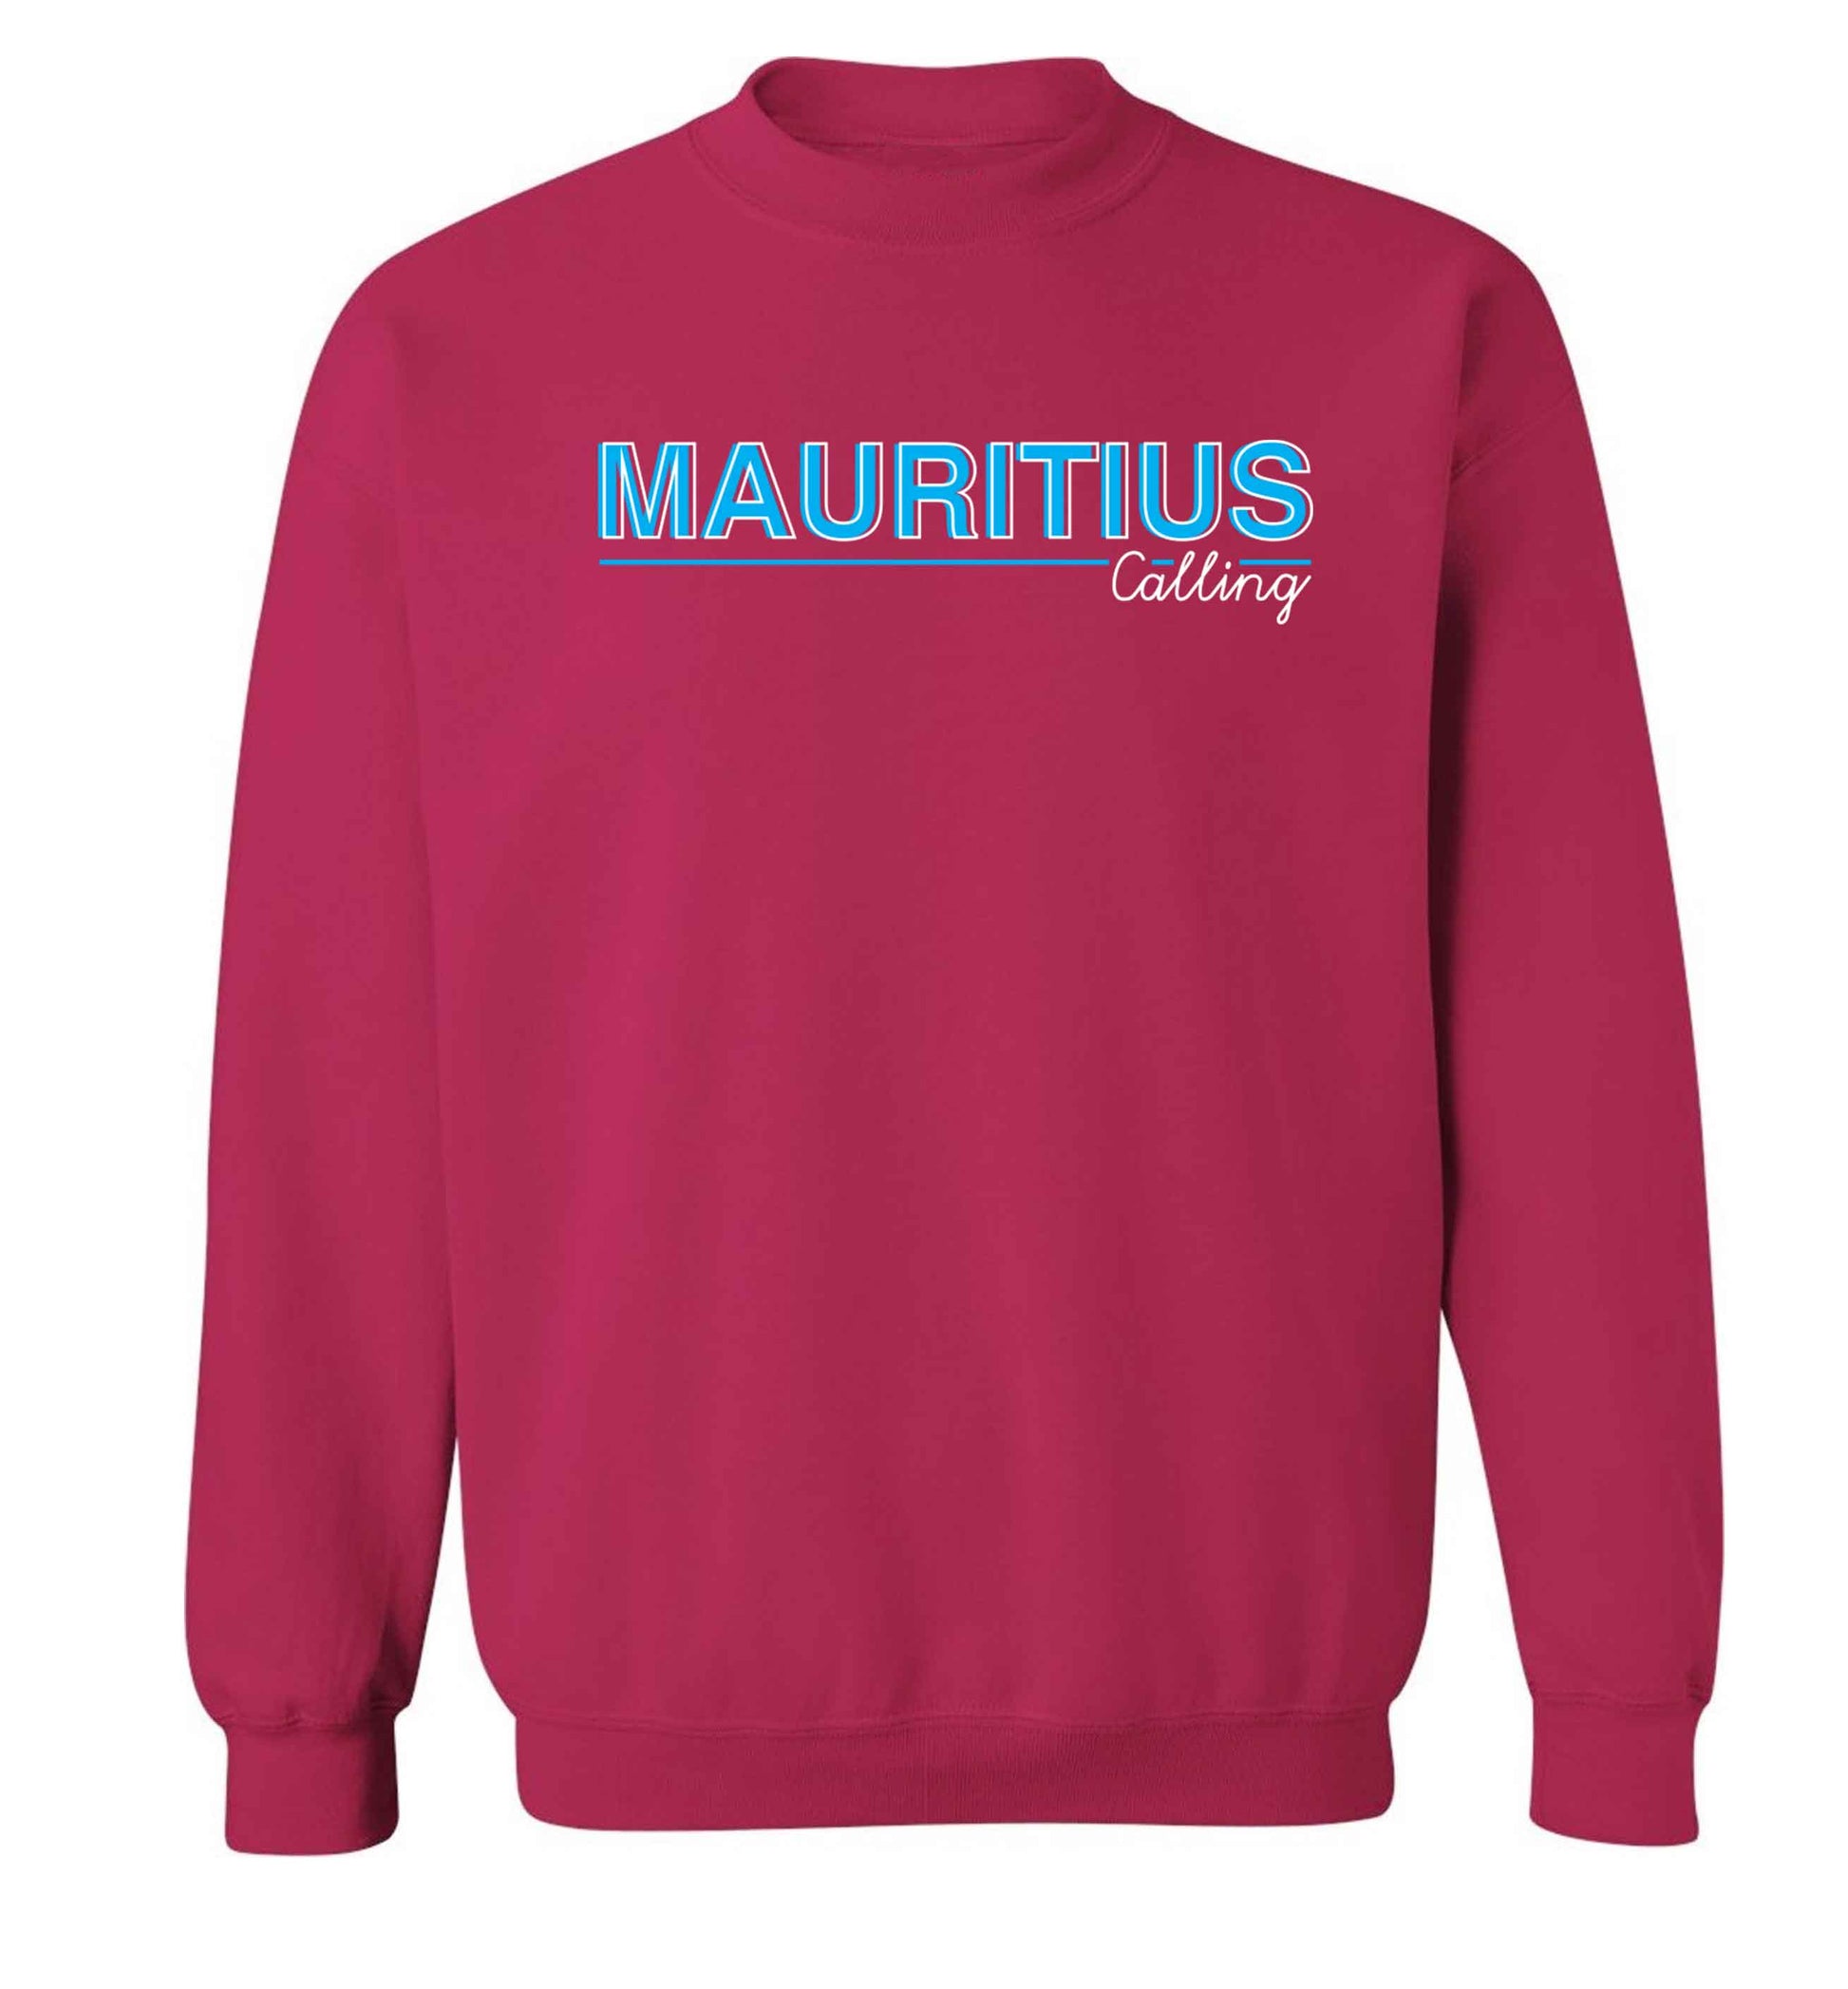 Mauritius calling Adult's unisex pink Sweater 2XL